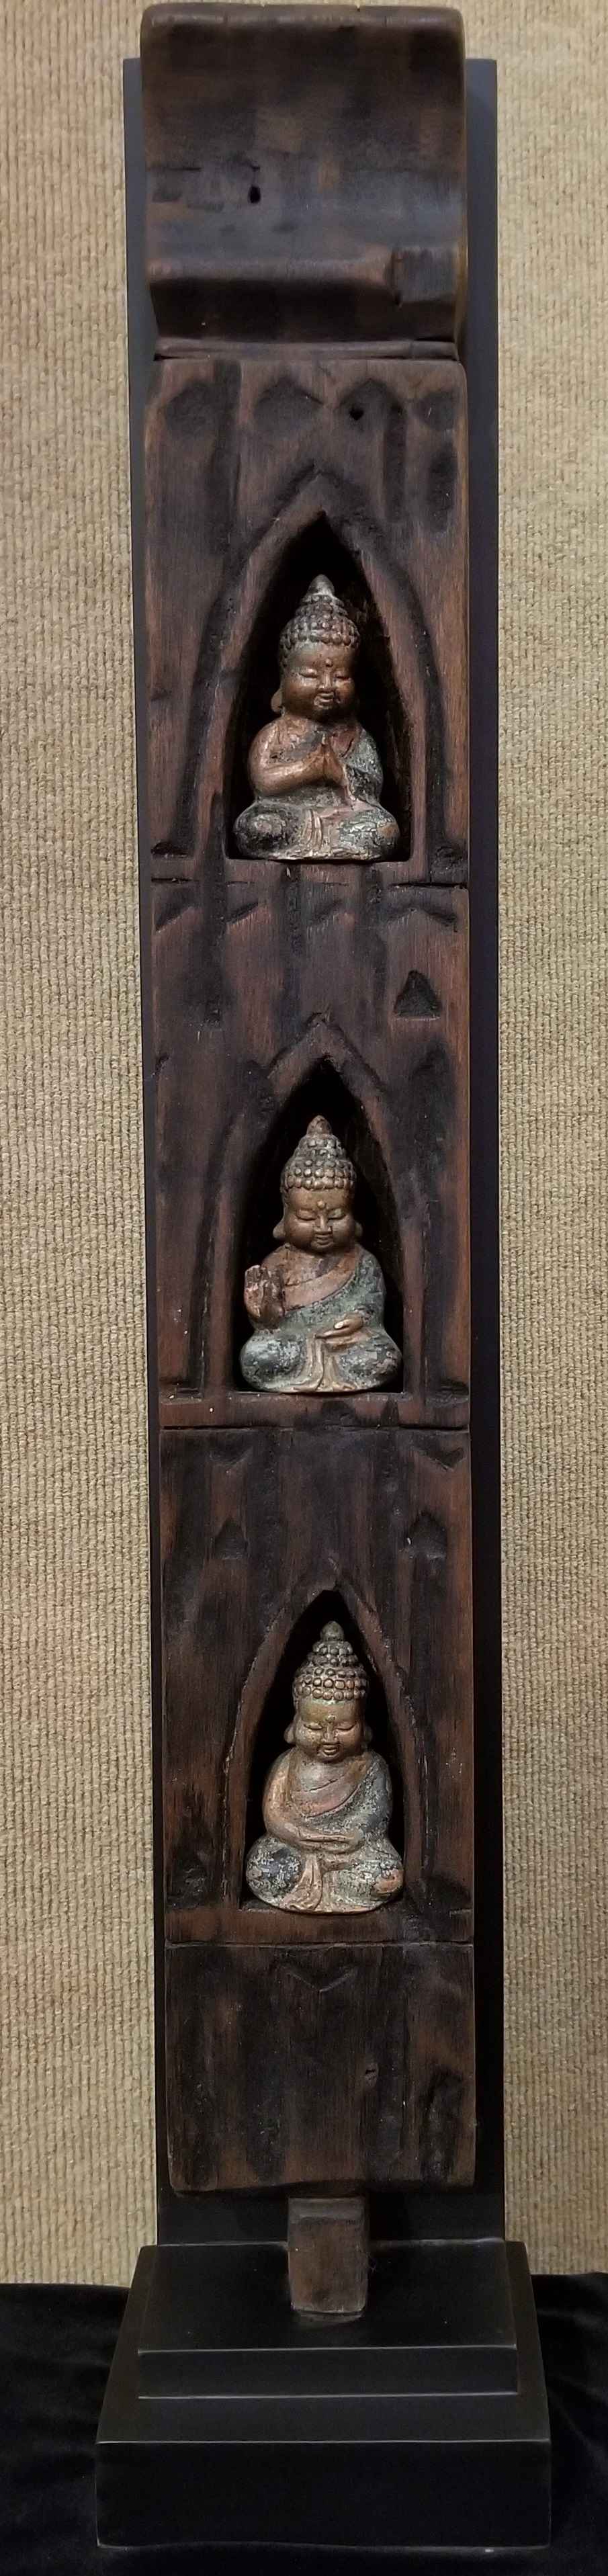 3 Baby Buddhas by  Gallery Pieces - Masterpiece Online